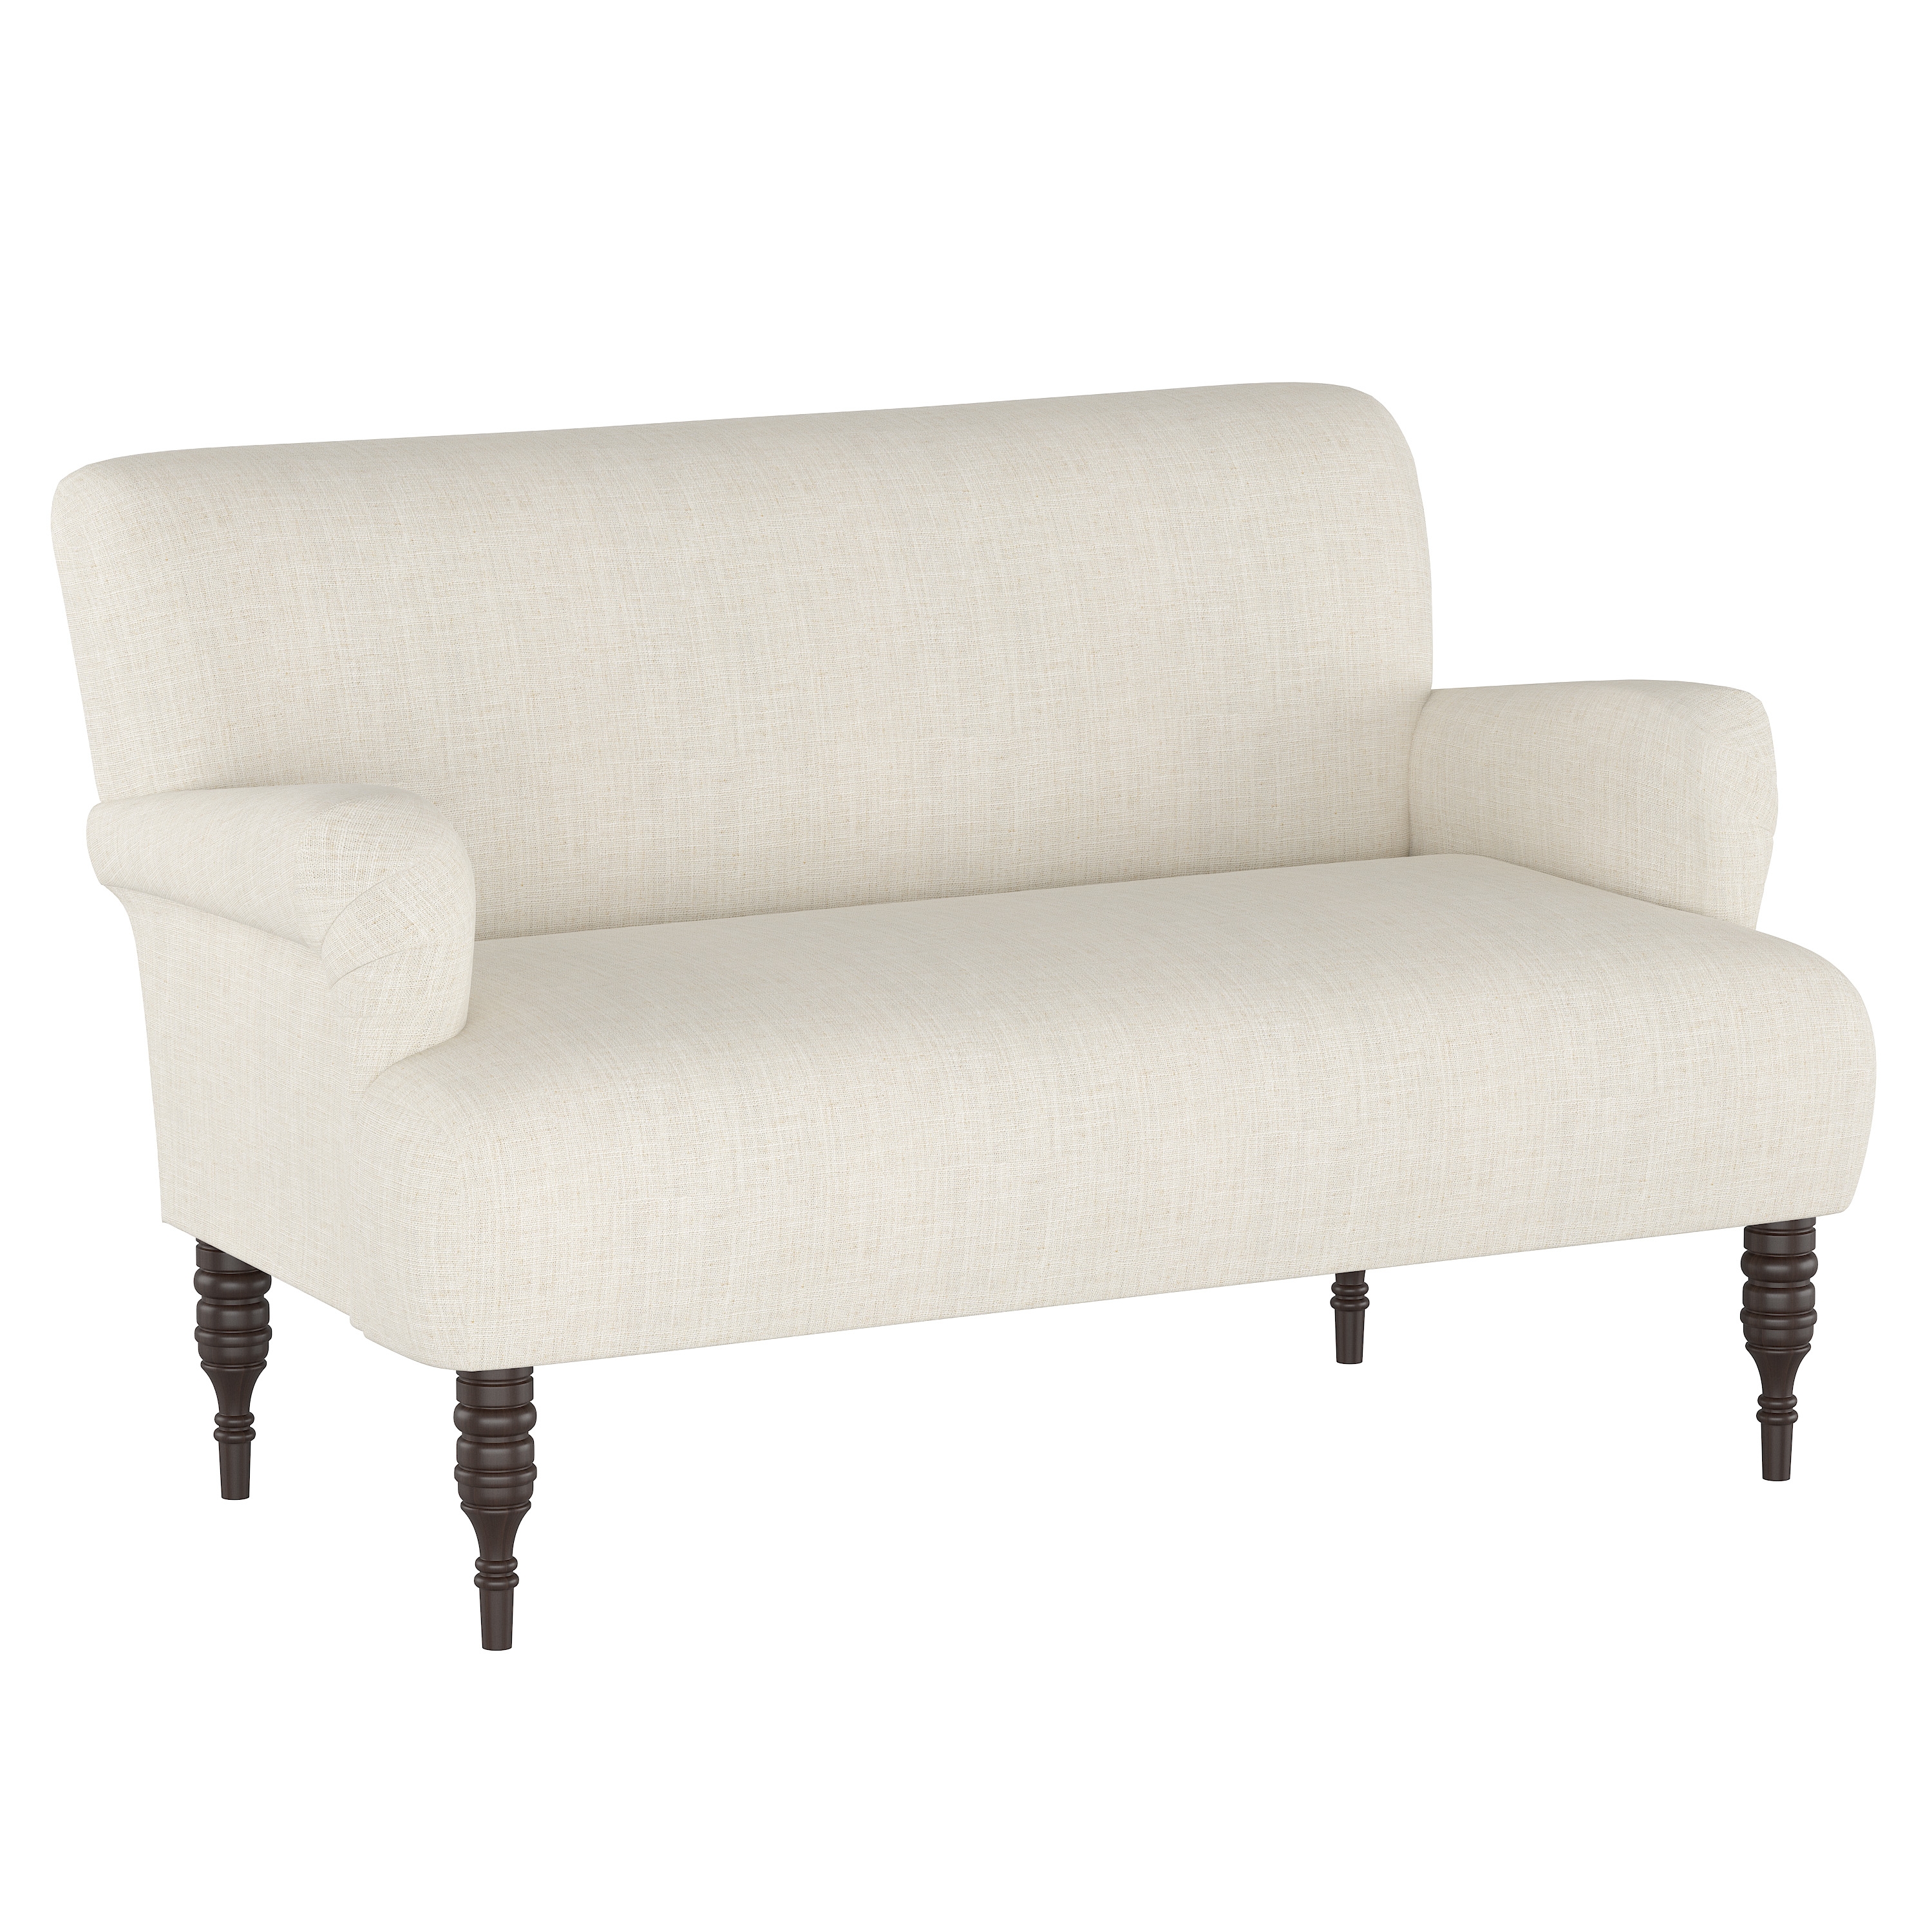 Clermont Settee, Talc - Image 1